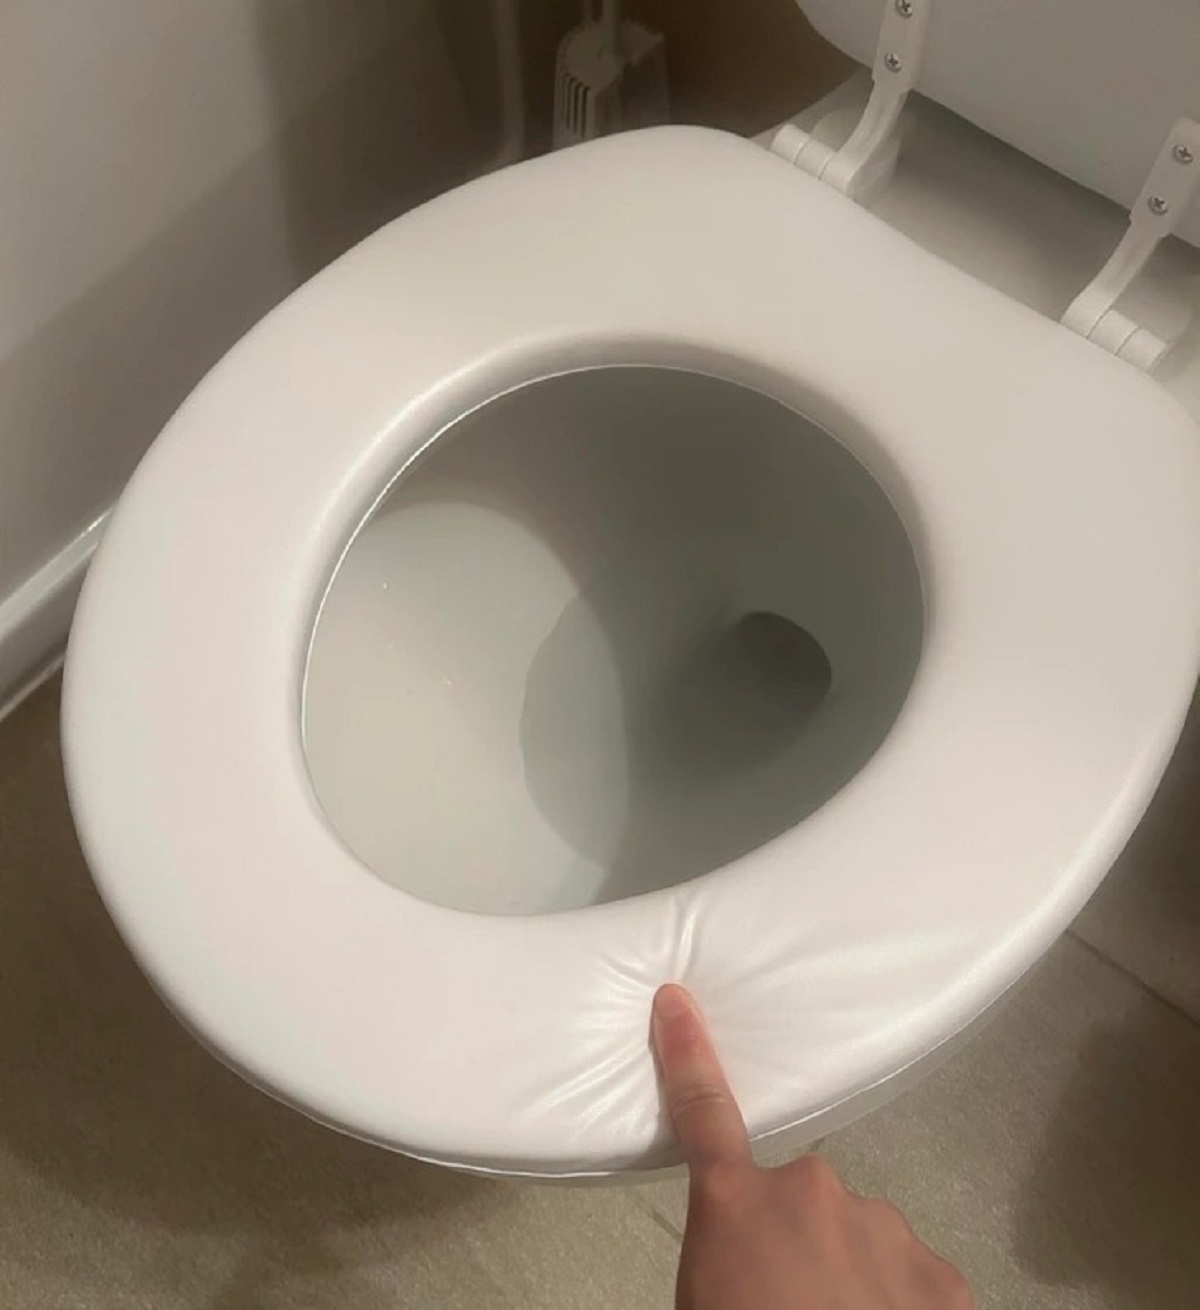 “Old toilet seat broke from wear and tear, so the landlord replaced it with this.”